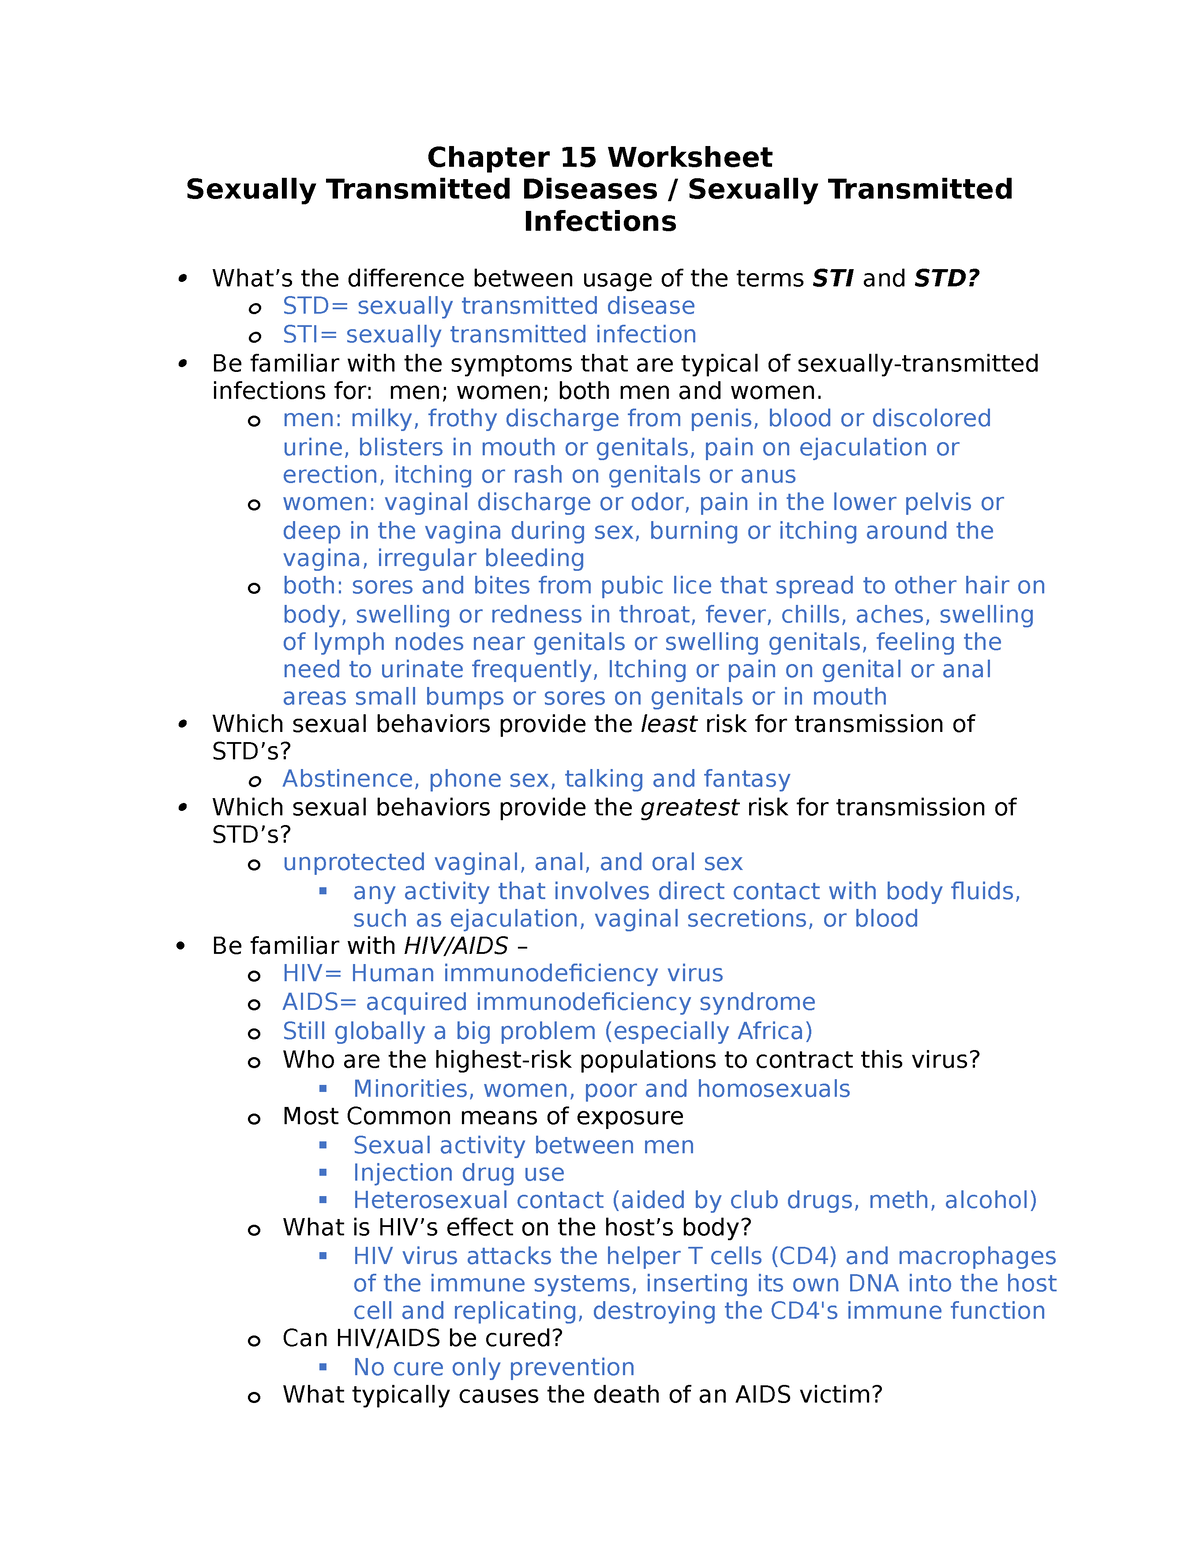 Chp 15 For Margie Stickney Chapter 15 Worksheet Sexually Transmitted Diseases Sexually 2963